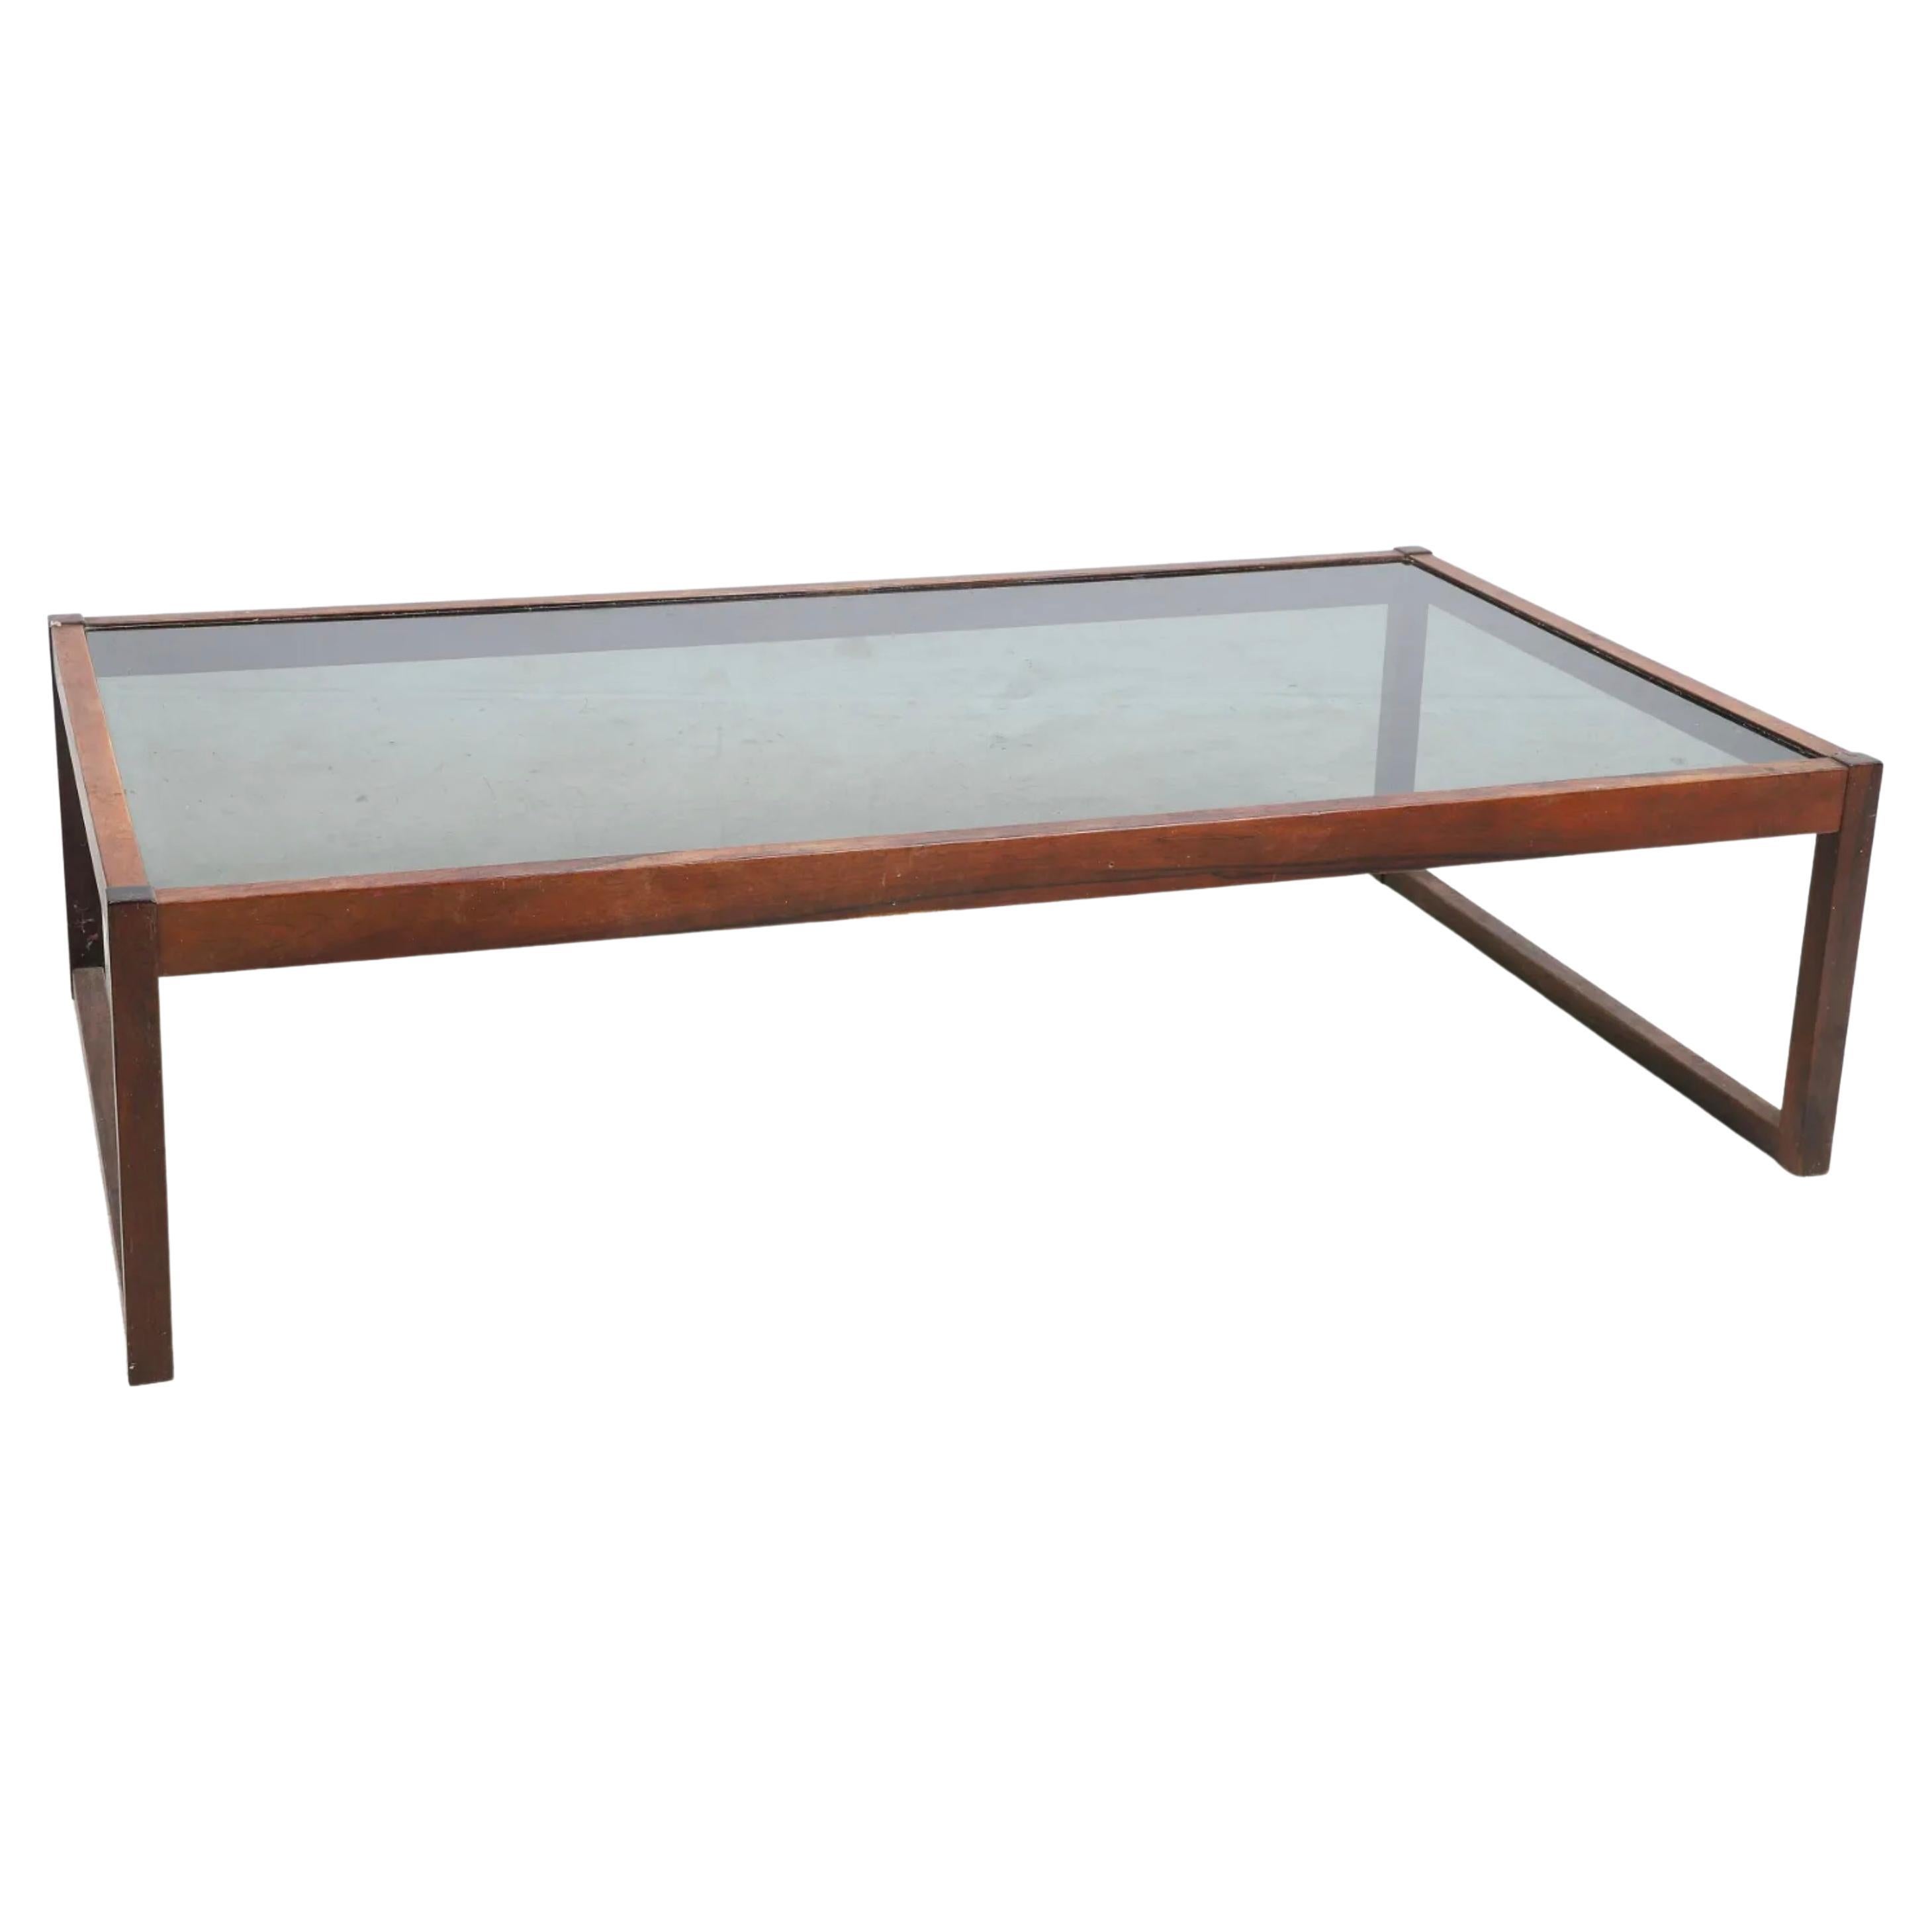 Mid Century Modern Design rosewood glass top coffee table with smoked glass insert. Solid rosewood frame. Good vintage condition shows signs of use on glass top. Made in Brazil. Located in Brooklyn NYC

57